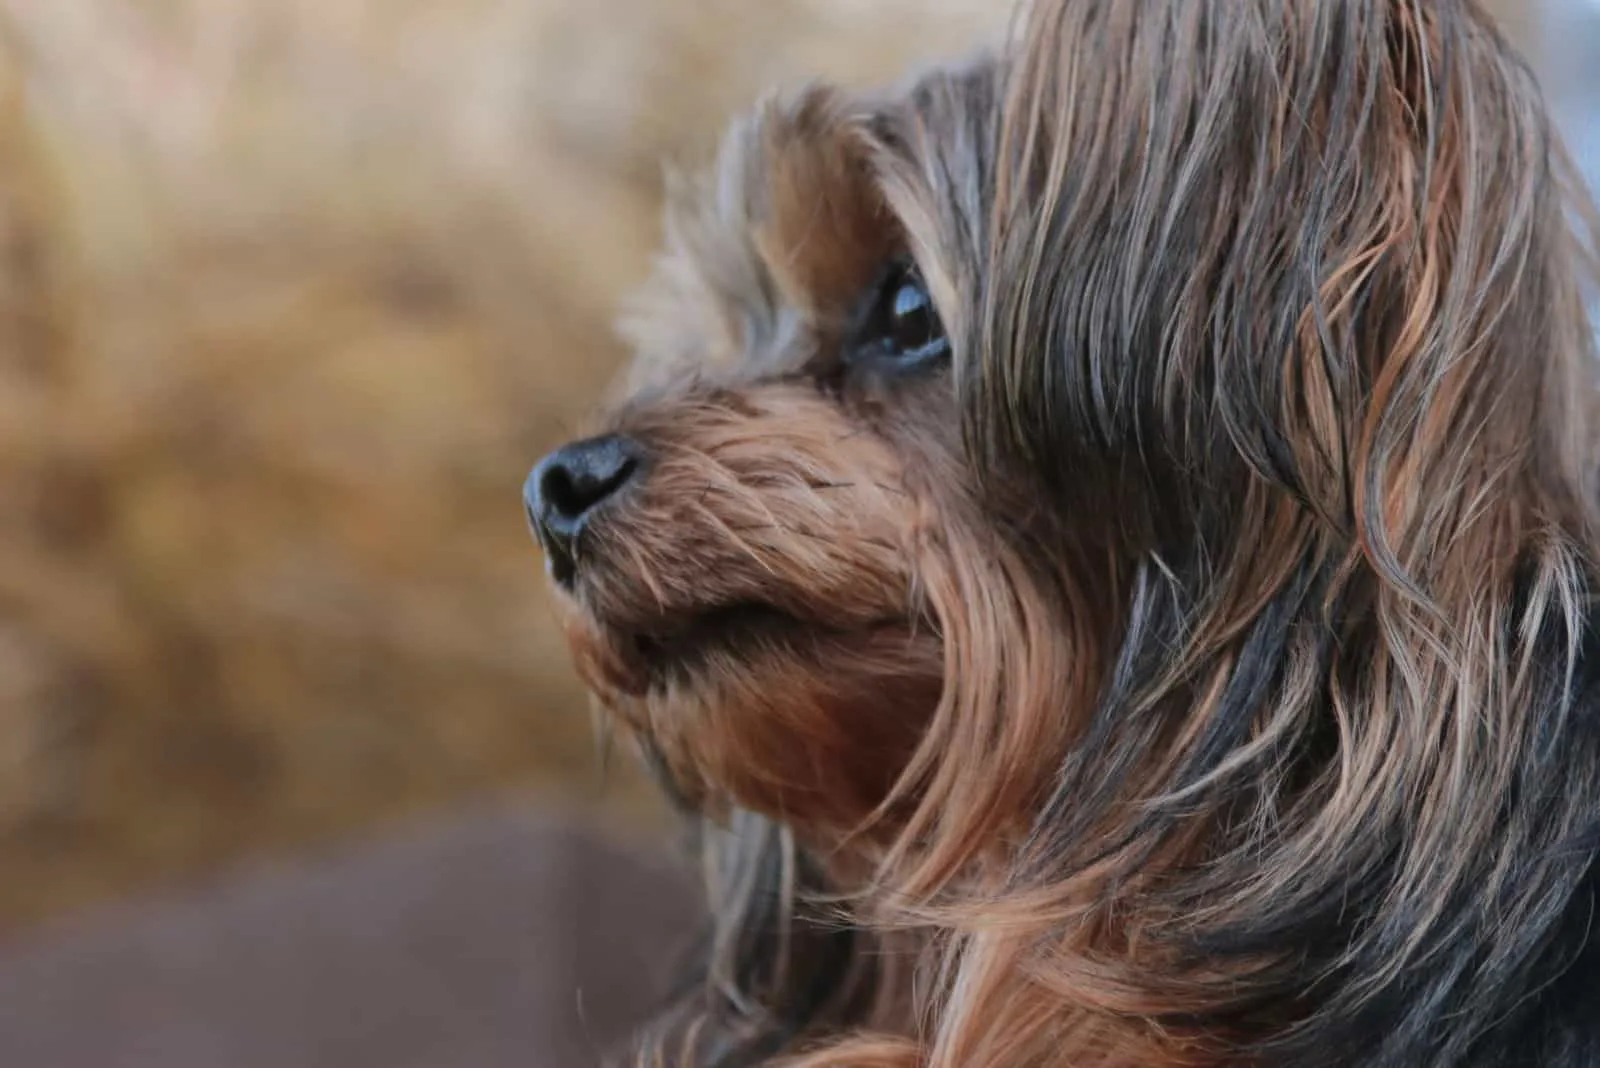 yorkie poo puppy in sideview close up image